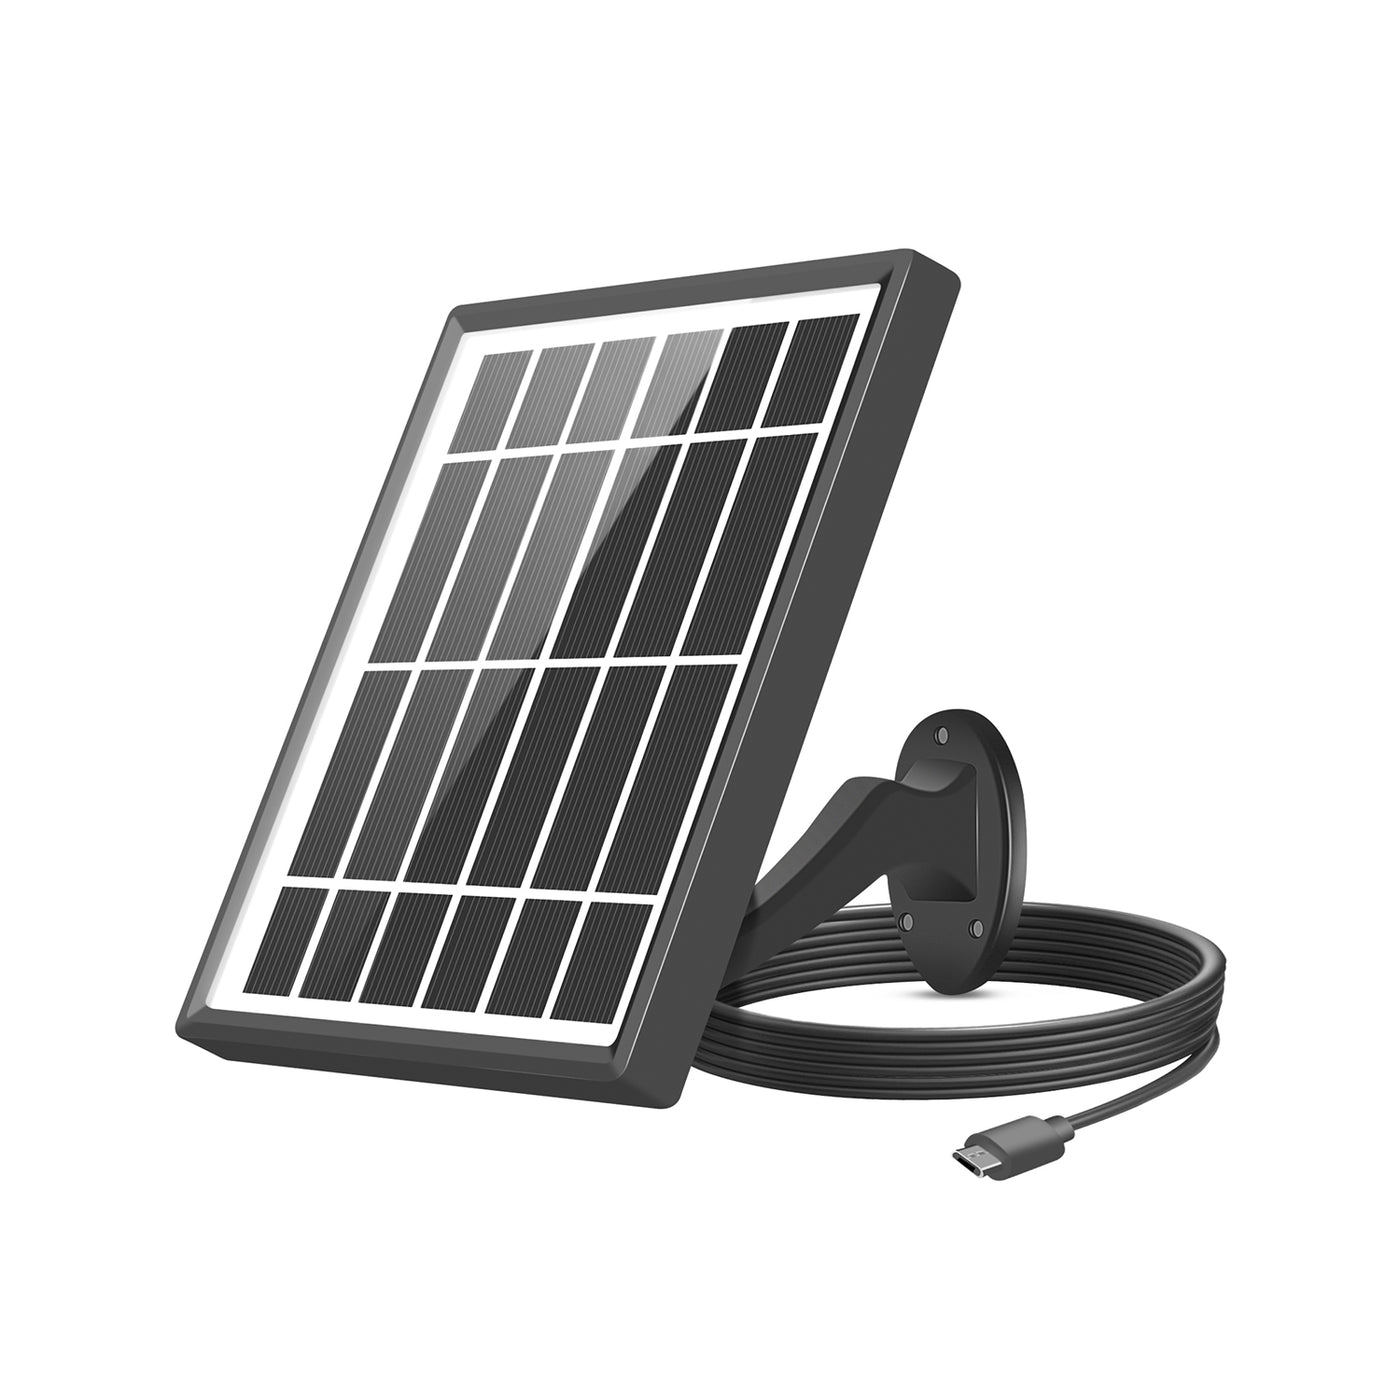 Solar Panel Compatible with Outdoor Rechargeable Battery Powered WiFi Security Camera C10/C10+/C20